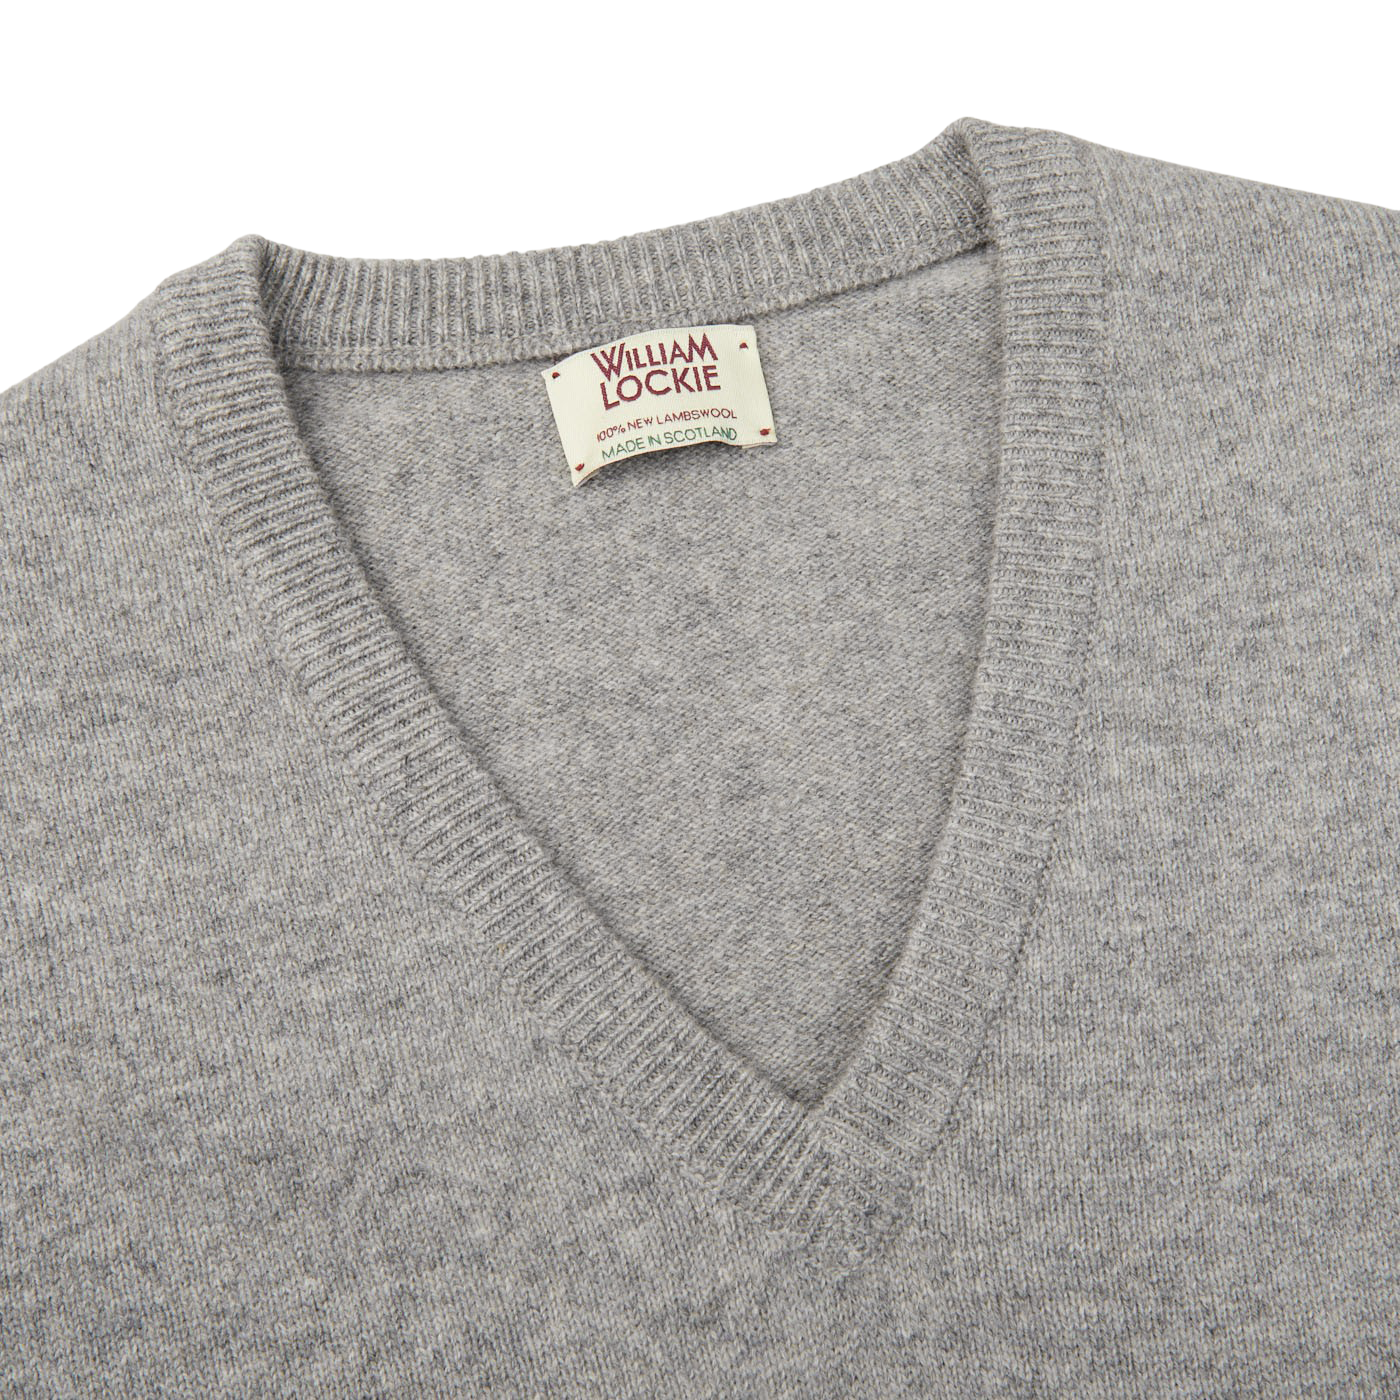 A plush Flannel Grey V-Neck Lambswool Sweater, crafted from luxurious Scottish lambswool, with a small William Lockie label accent.